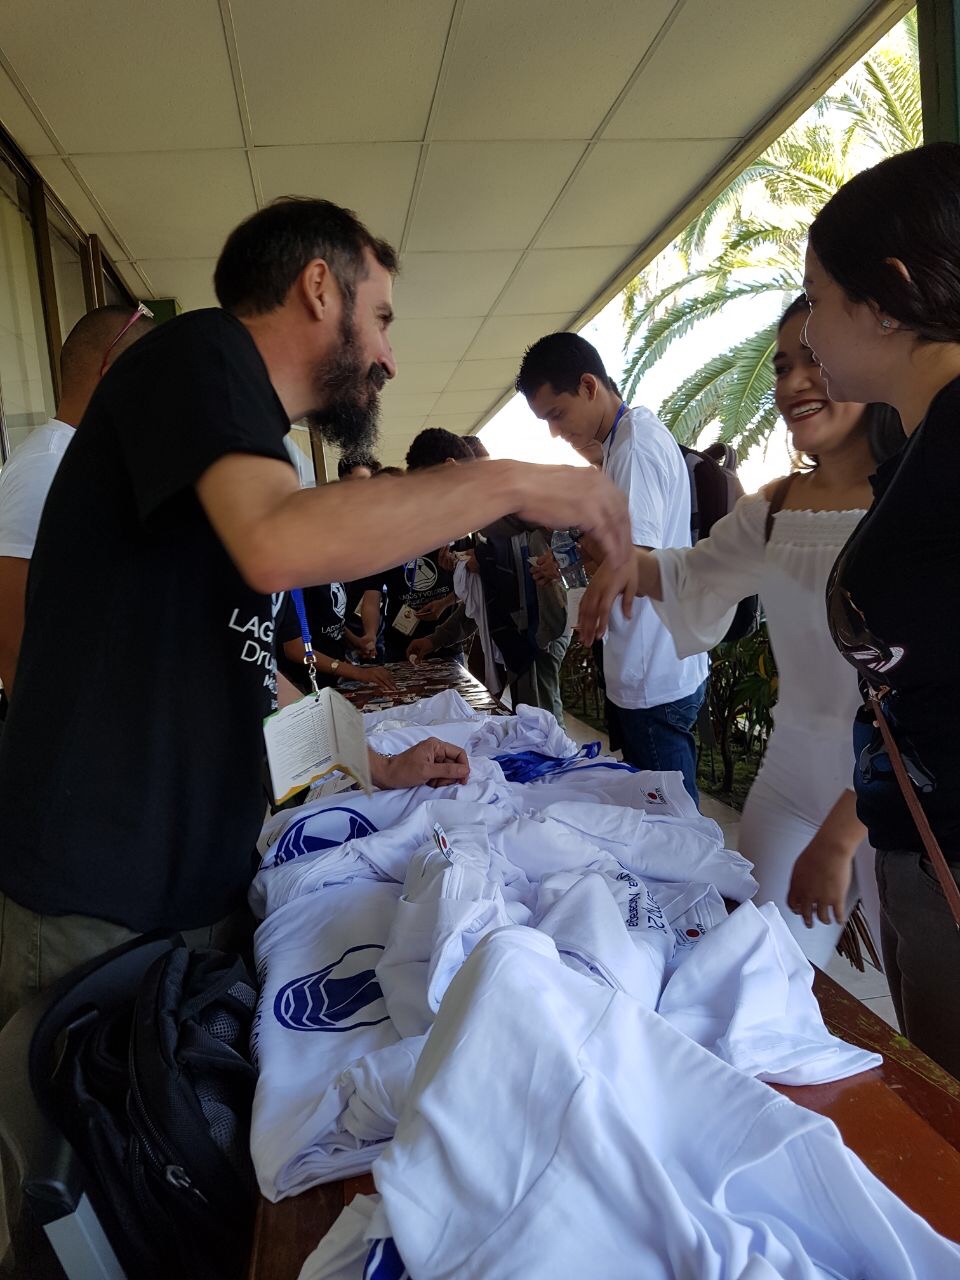 Camp volunteers passing out t-shirts to attendees.